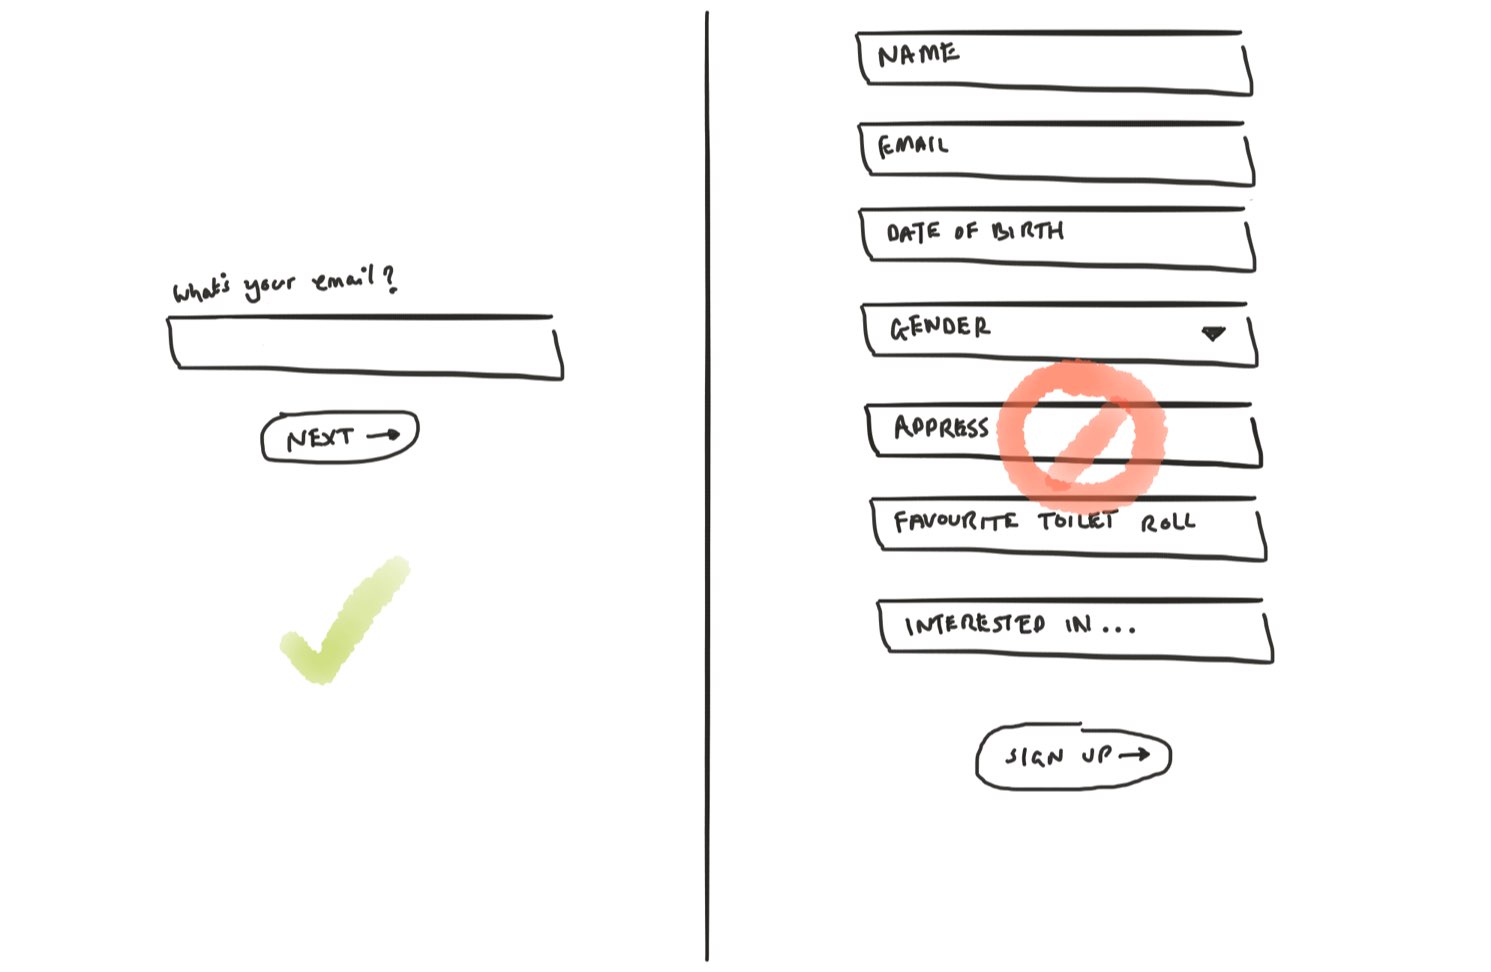 Sketch of simple form vs. large form with too many fields